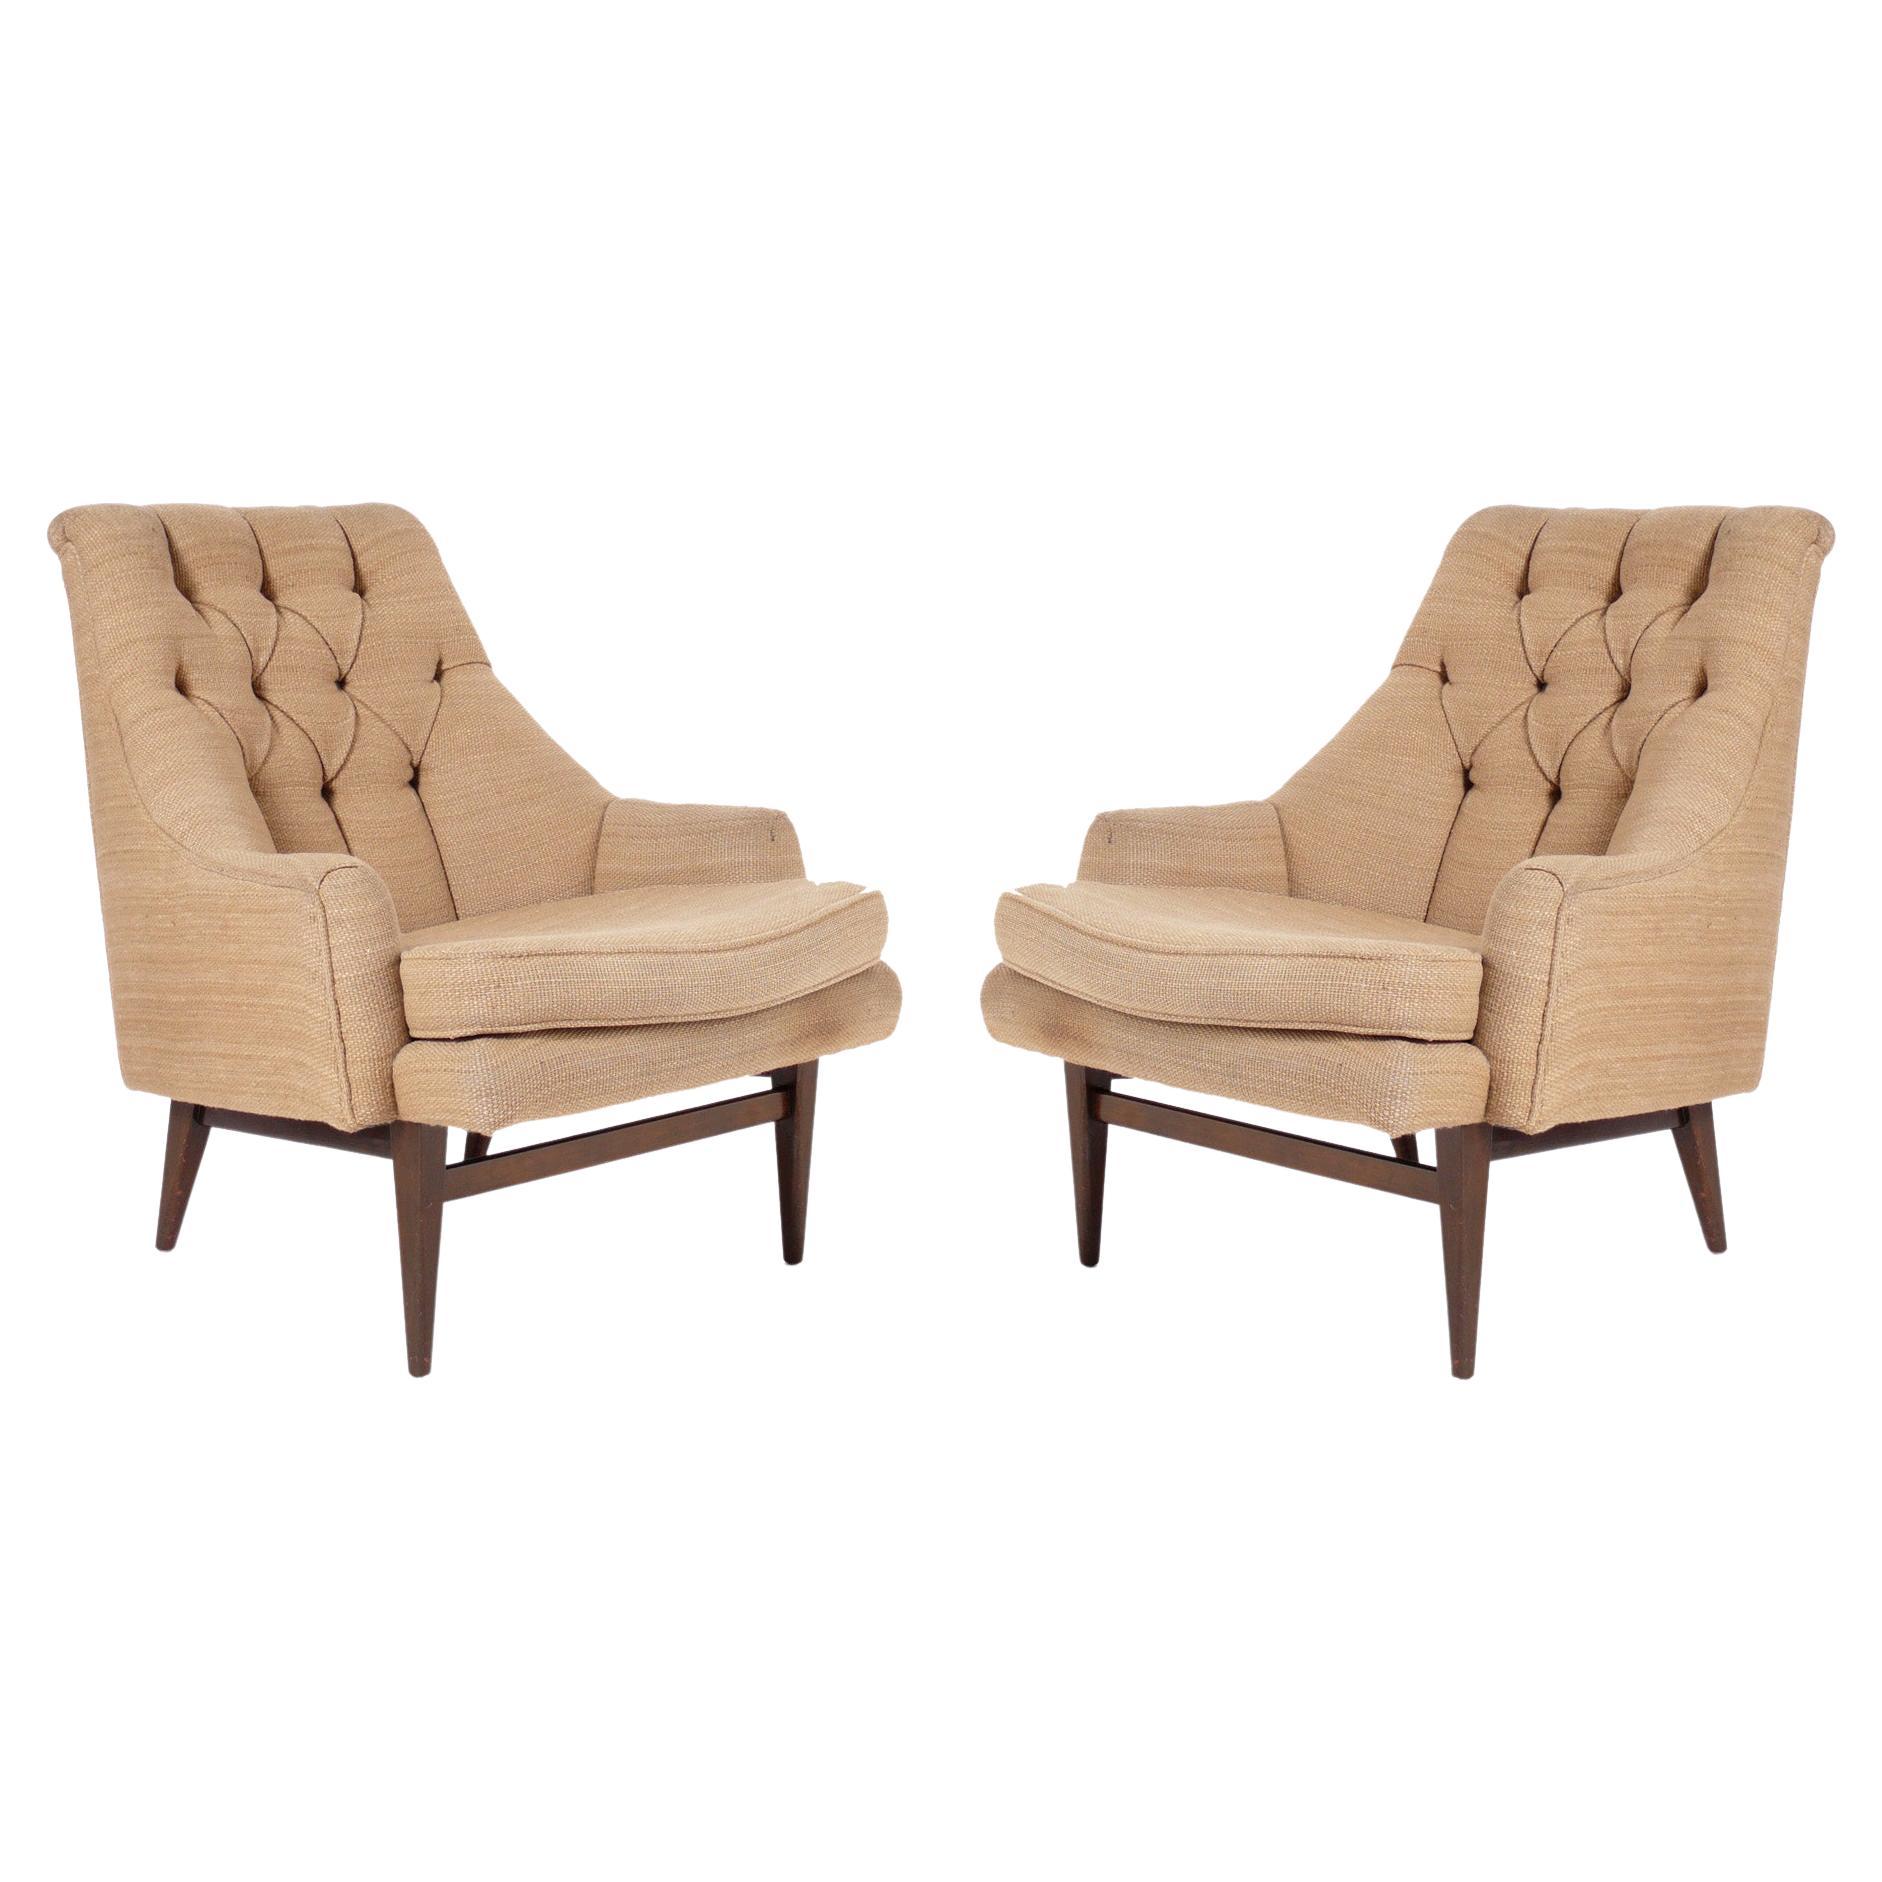 Pair of Curvaceous Tufted Lounge Chairs attributed to Dunbar  For Sale